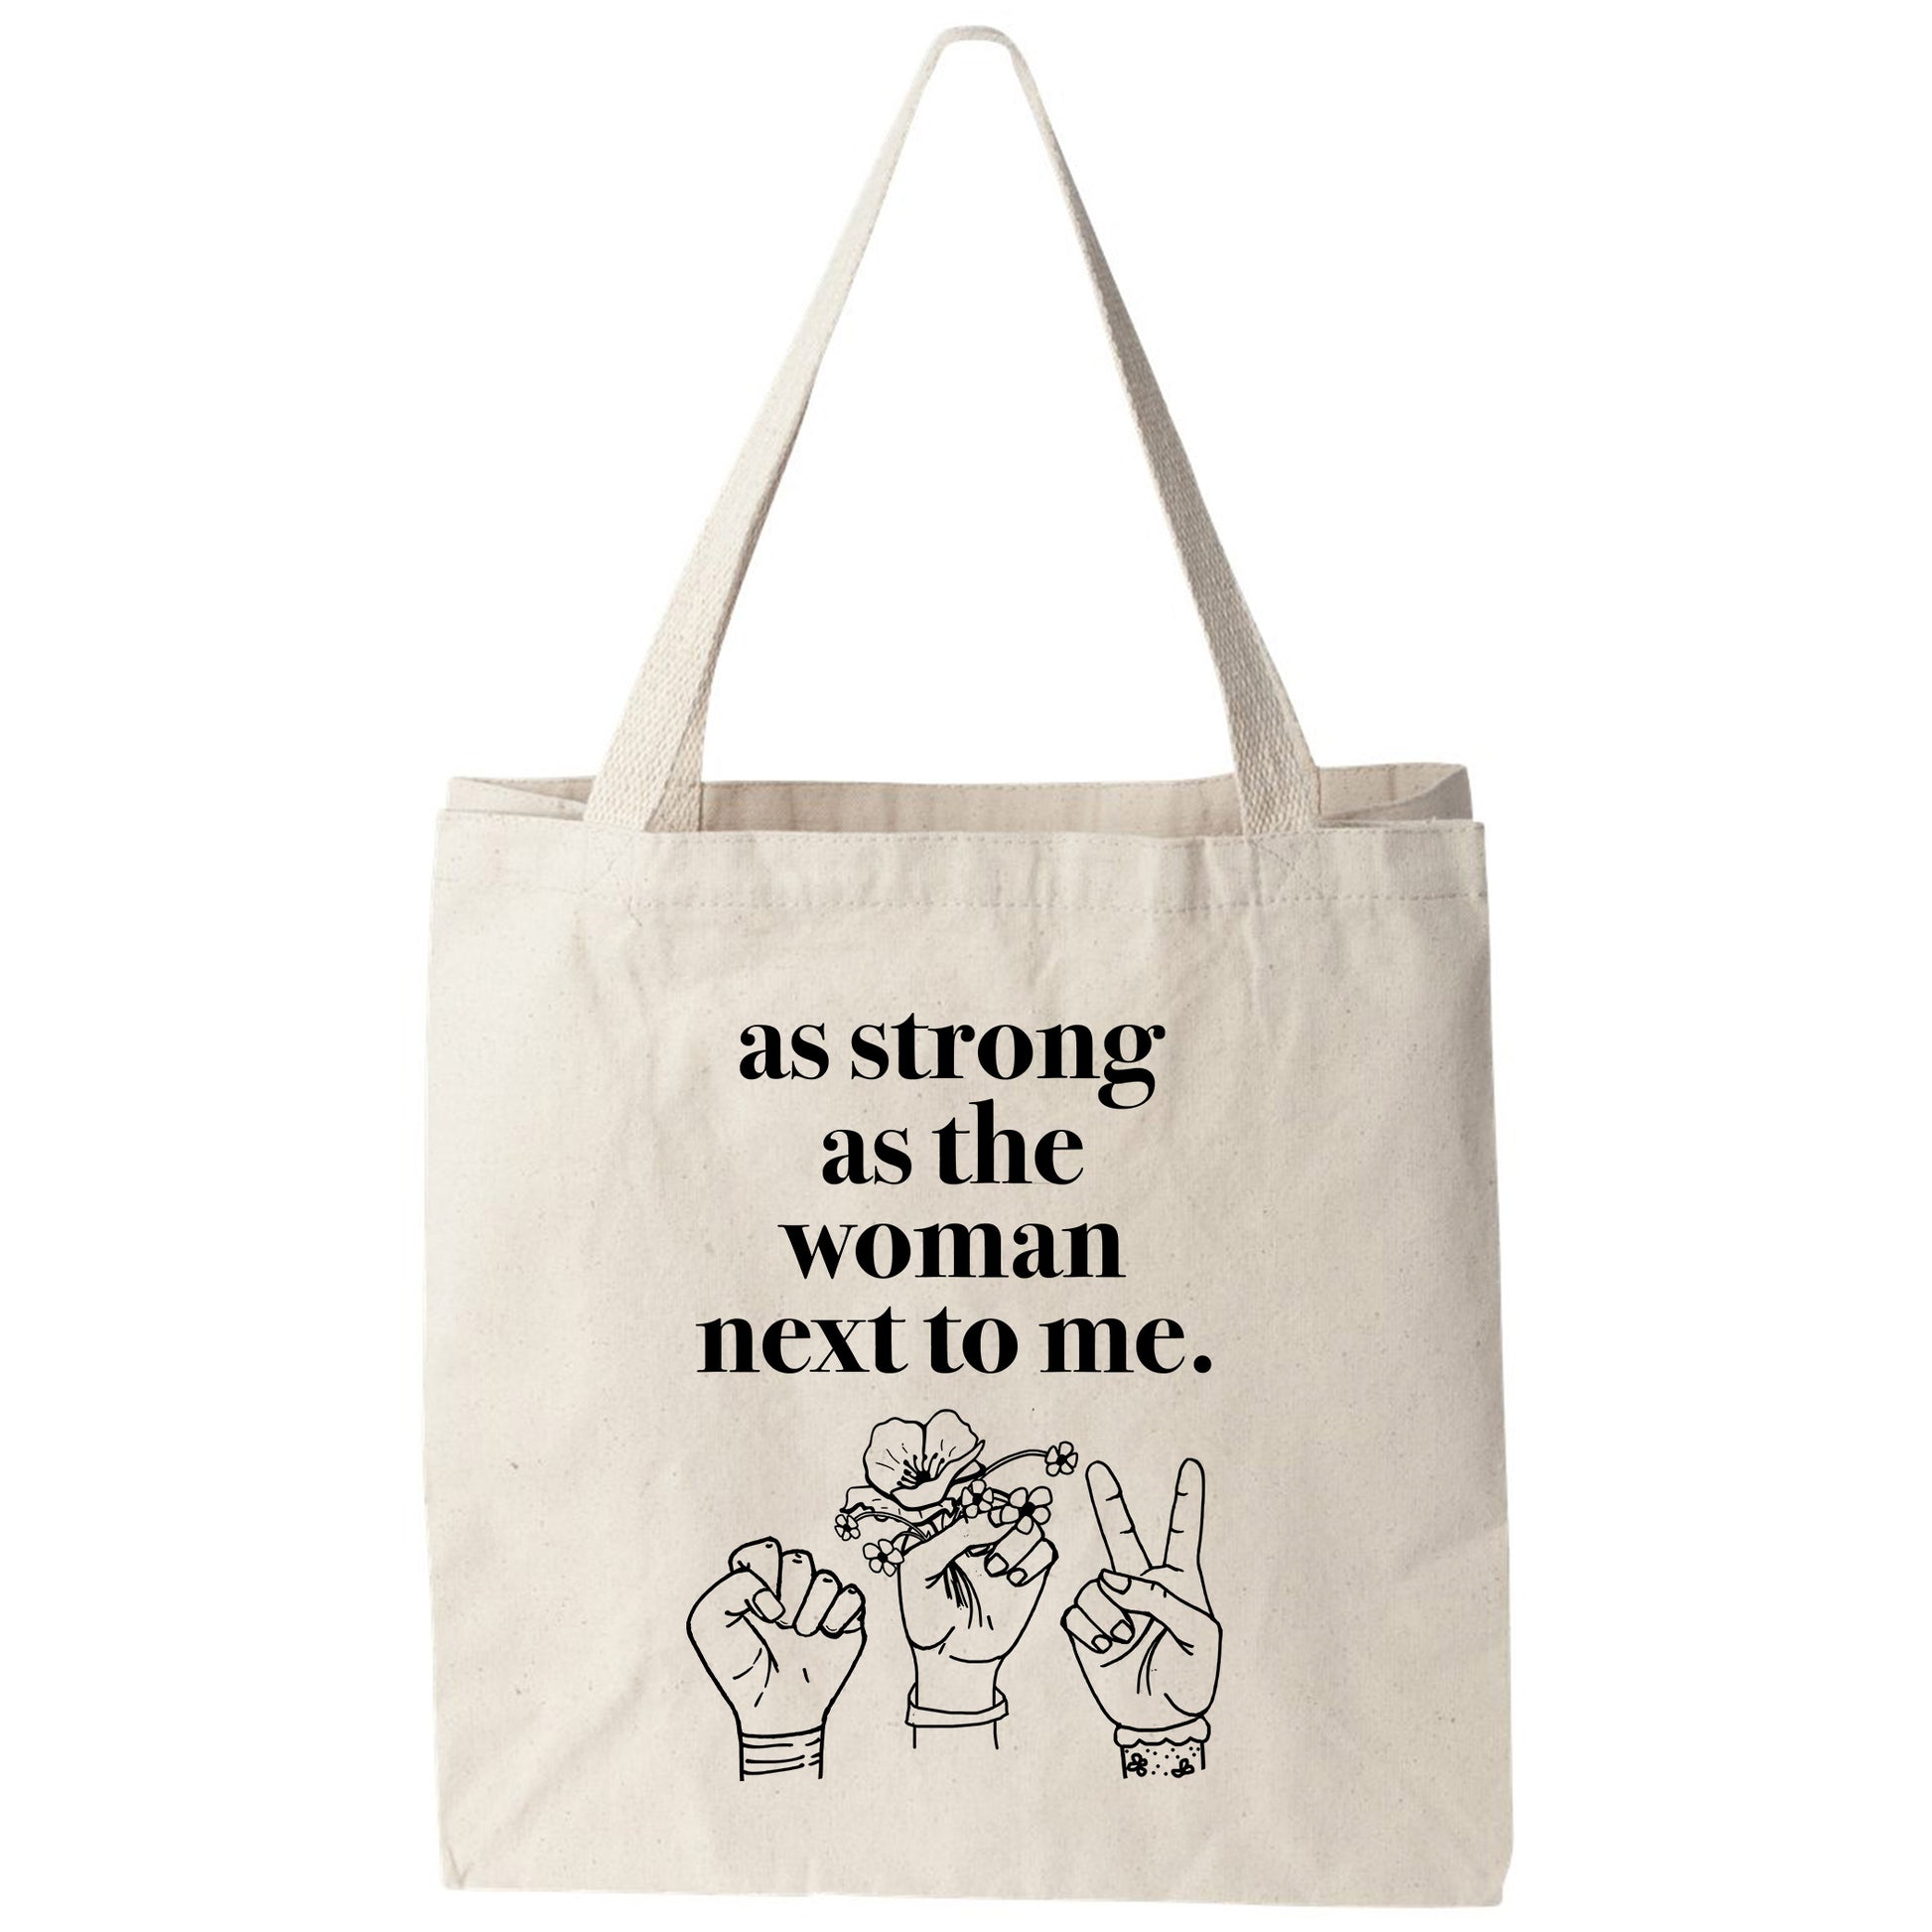 a tote bag that says as strong as the woman next to me